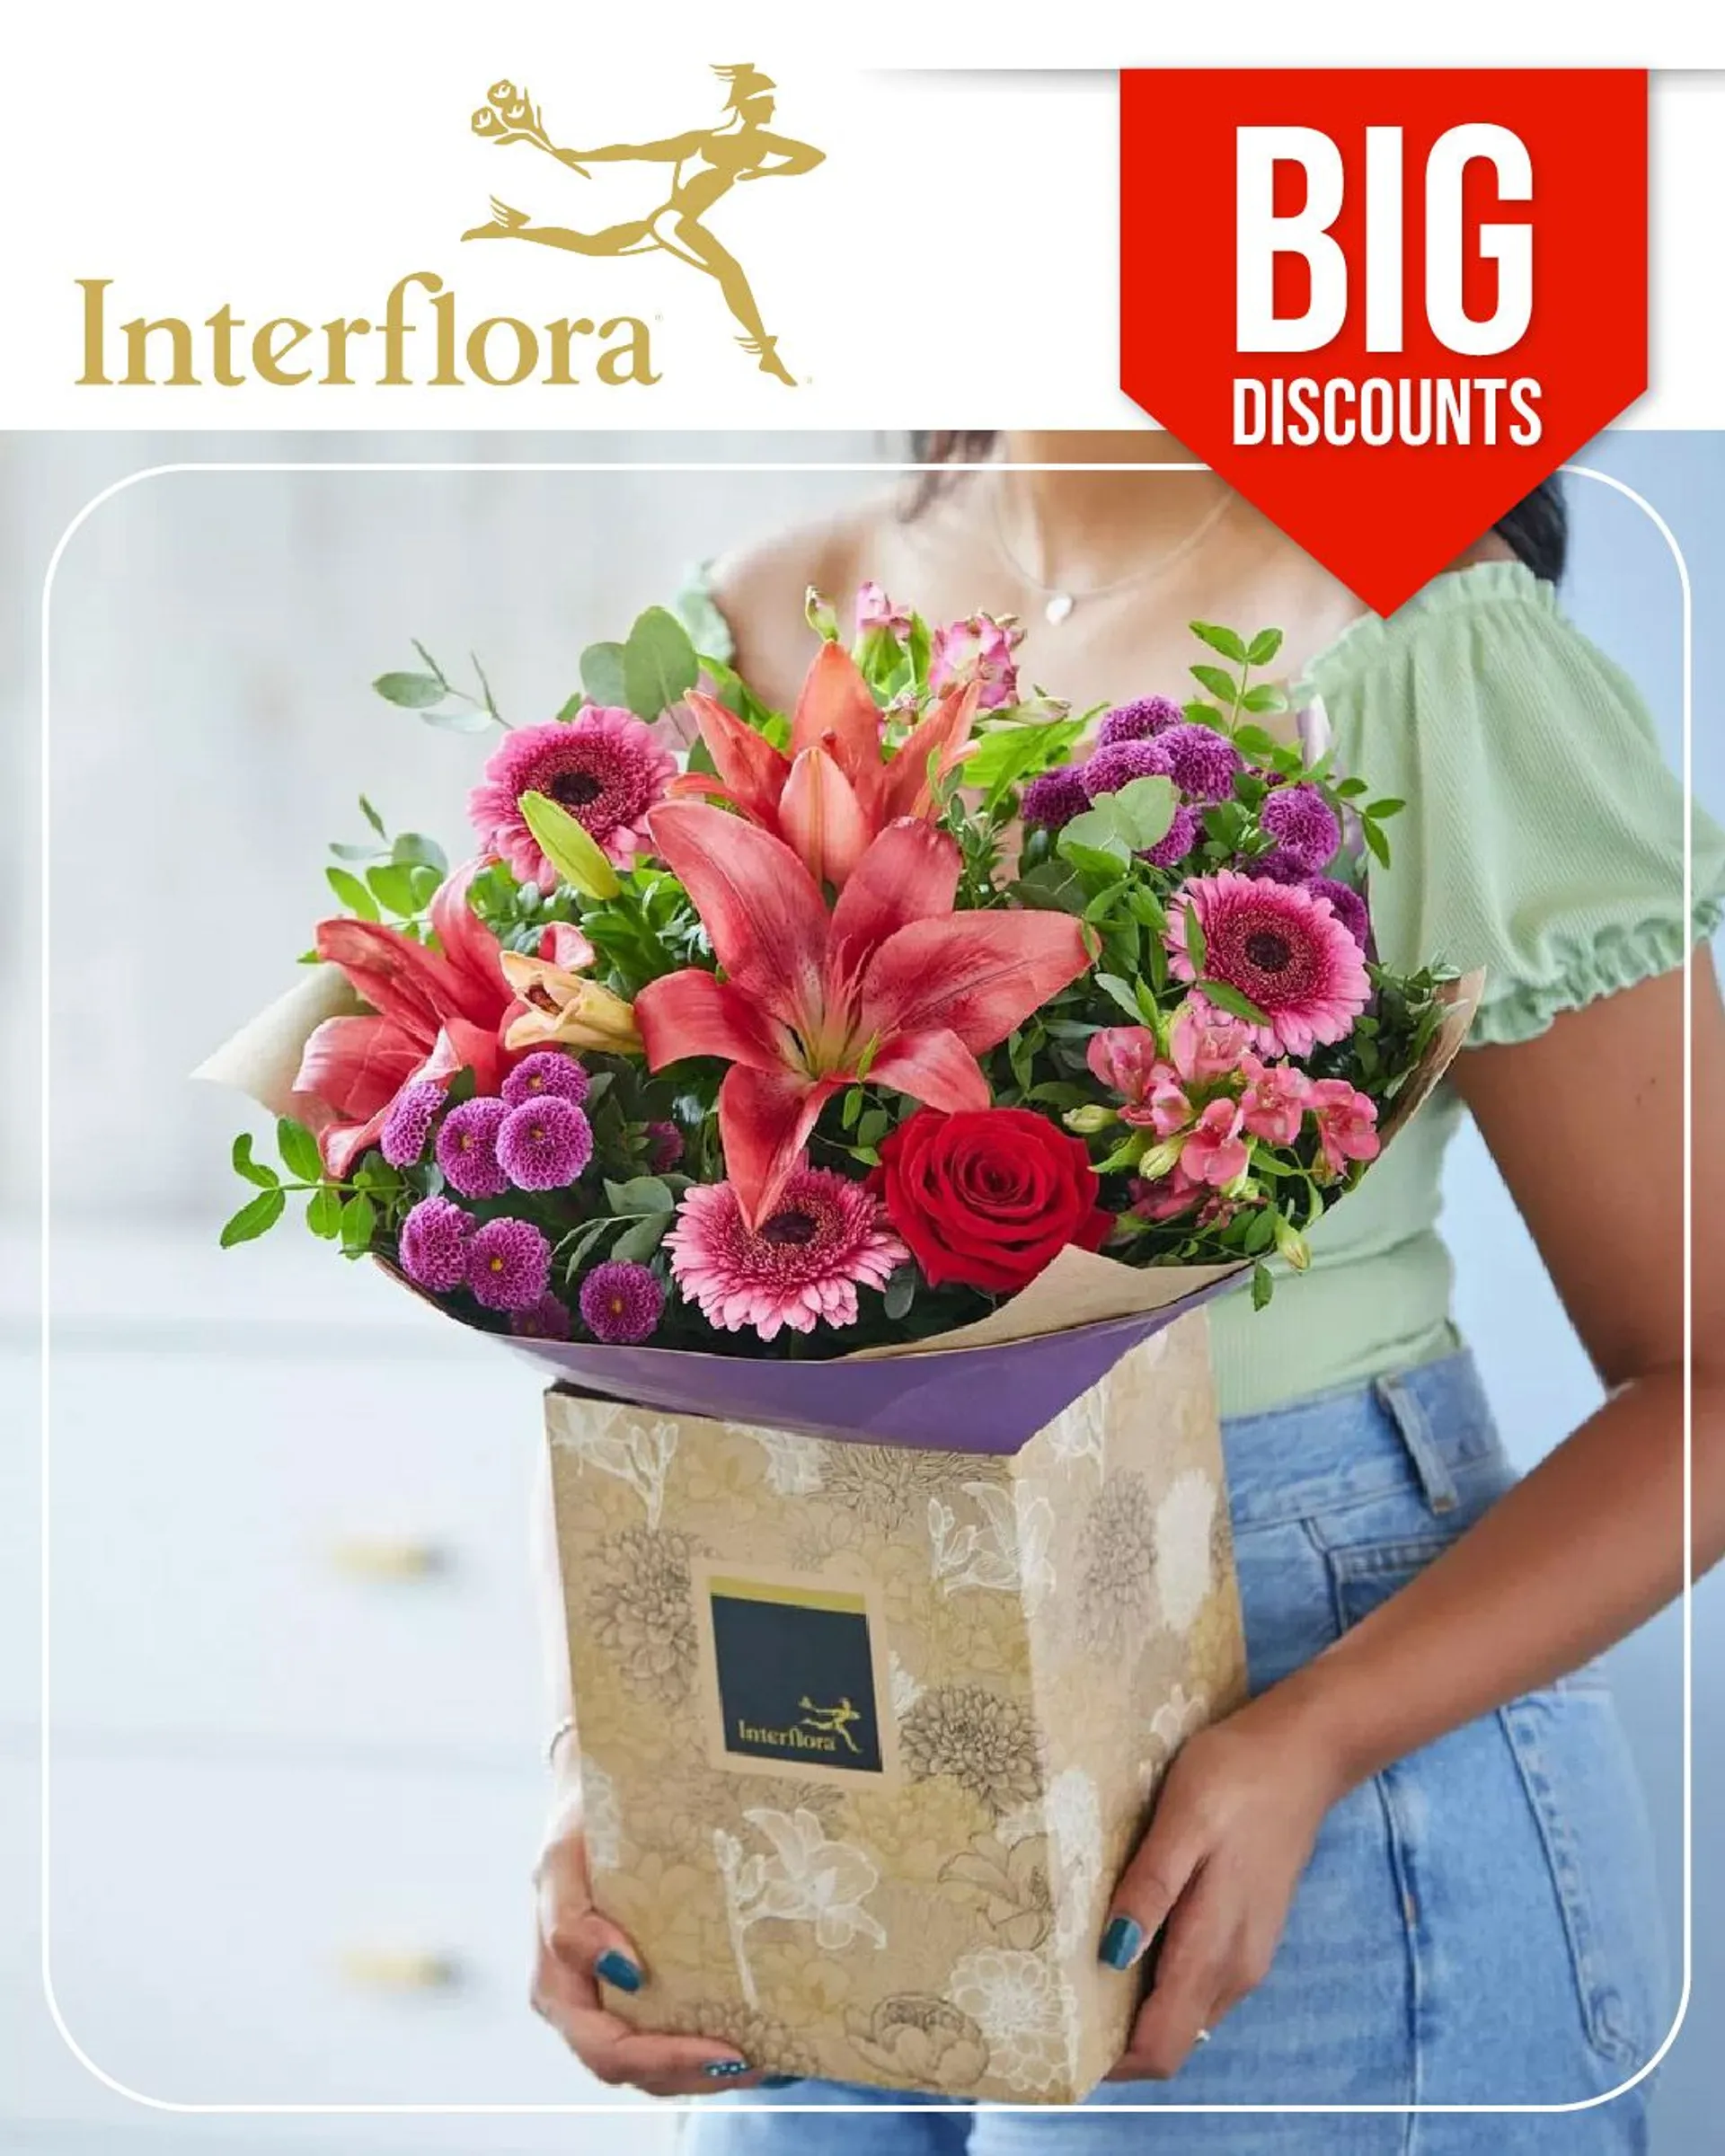 Interflora - Flowers, Plants & Gifts from 12 March to 17 March 2023 - Catalogue Page 1